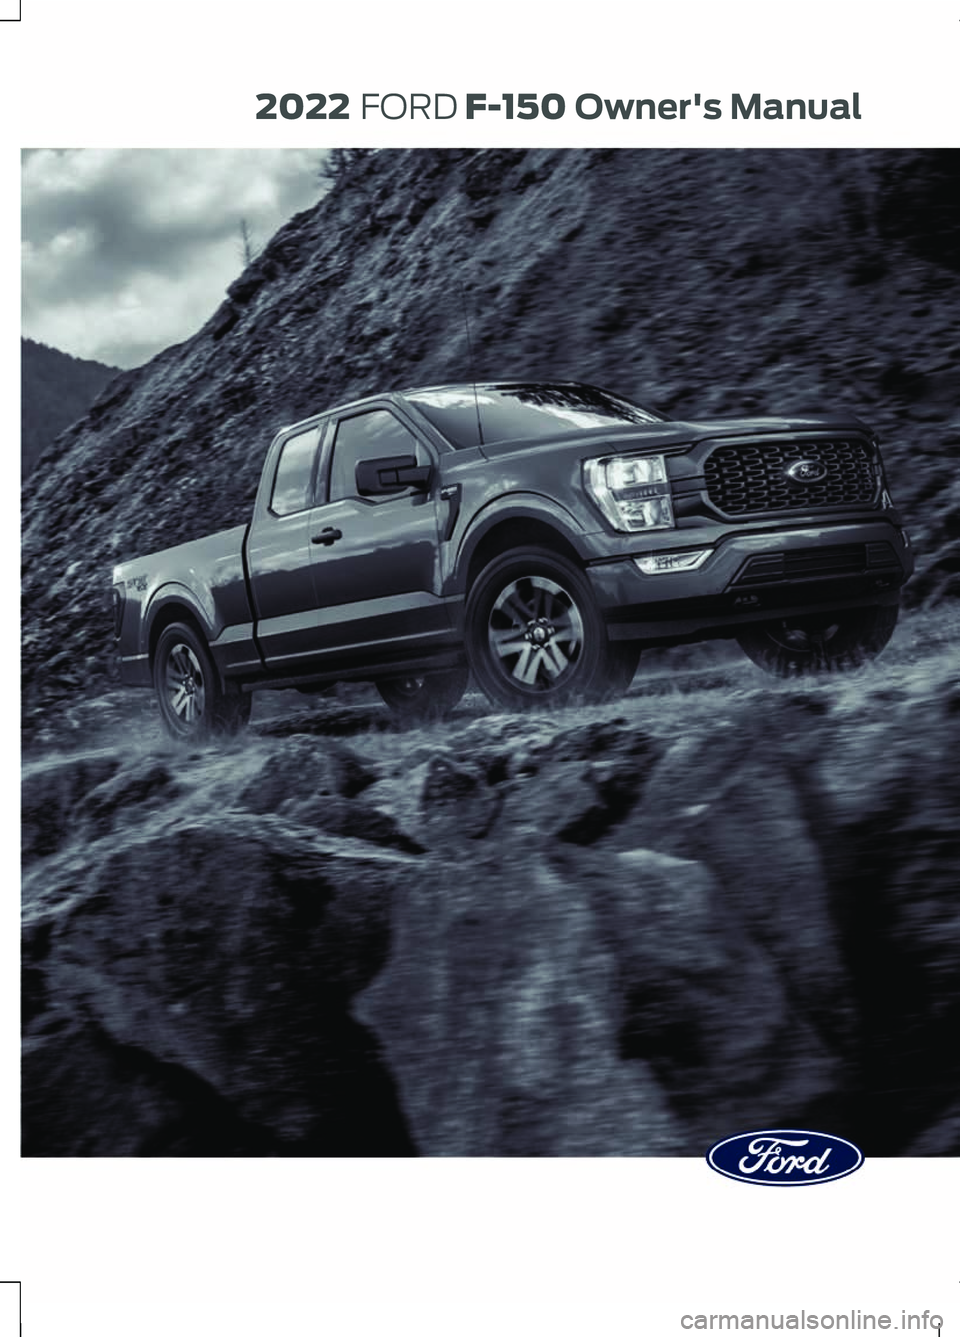 FORD F-150 2022  Owners Manual  2022
 FORD F-150 Owner's Manual 